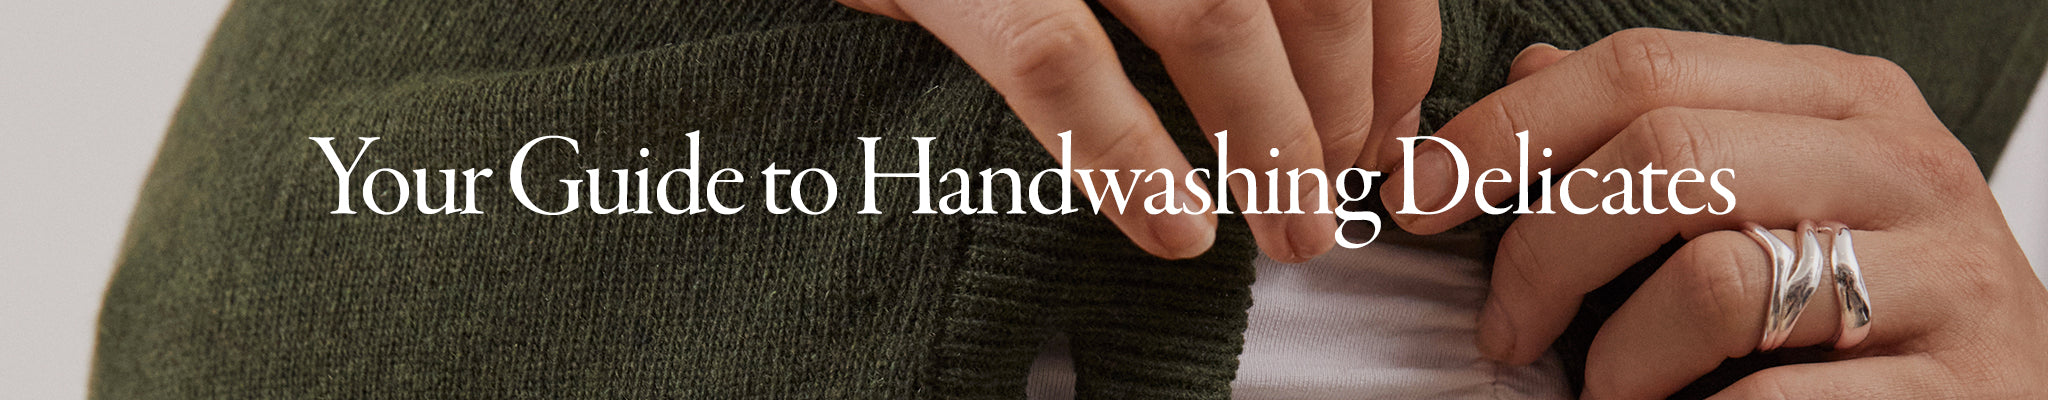 Your Guide to Handwashing Delicates